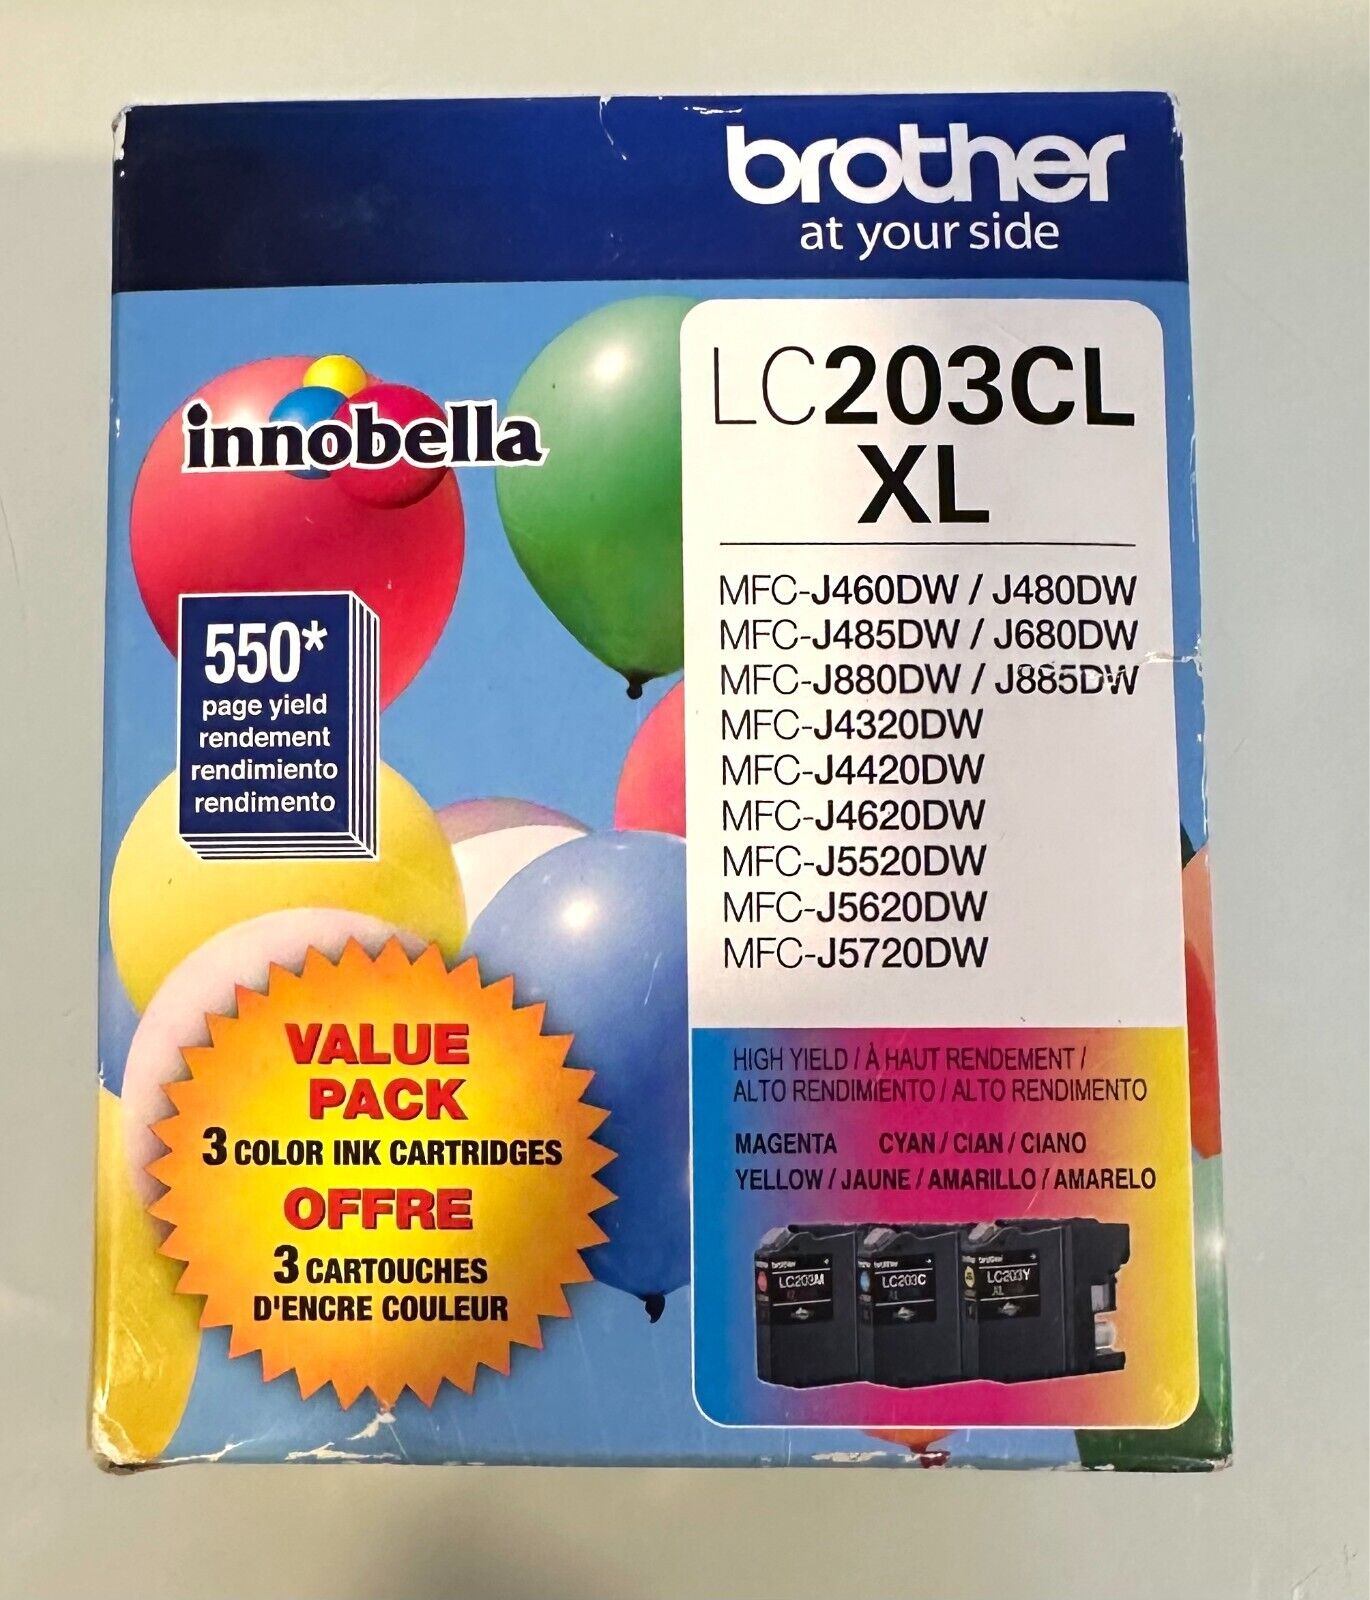 New Brother LC203CL XL Printer Ink Triple Pack EXP 10/2019 - NEW and SEALED